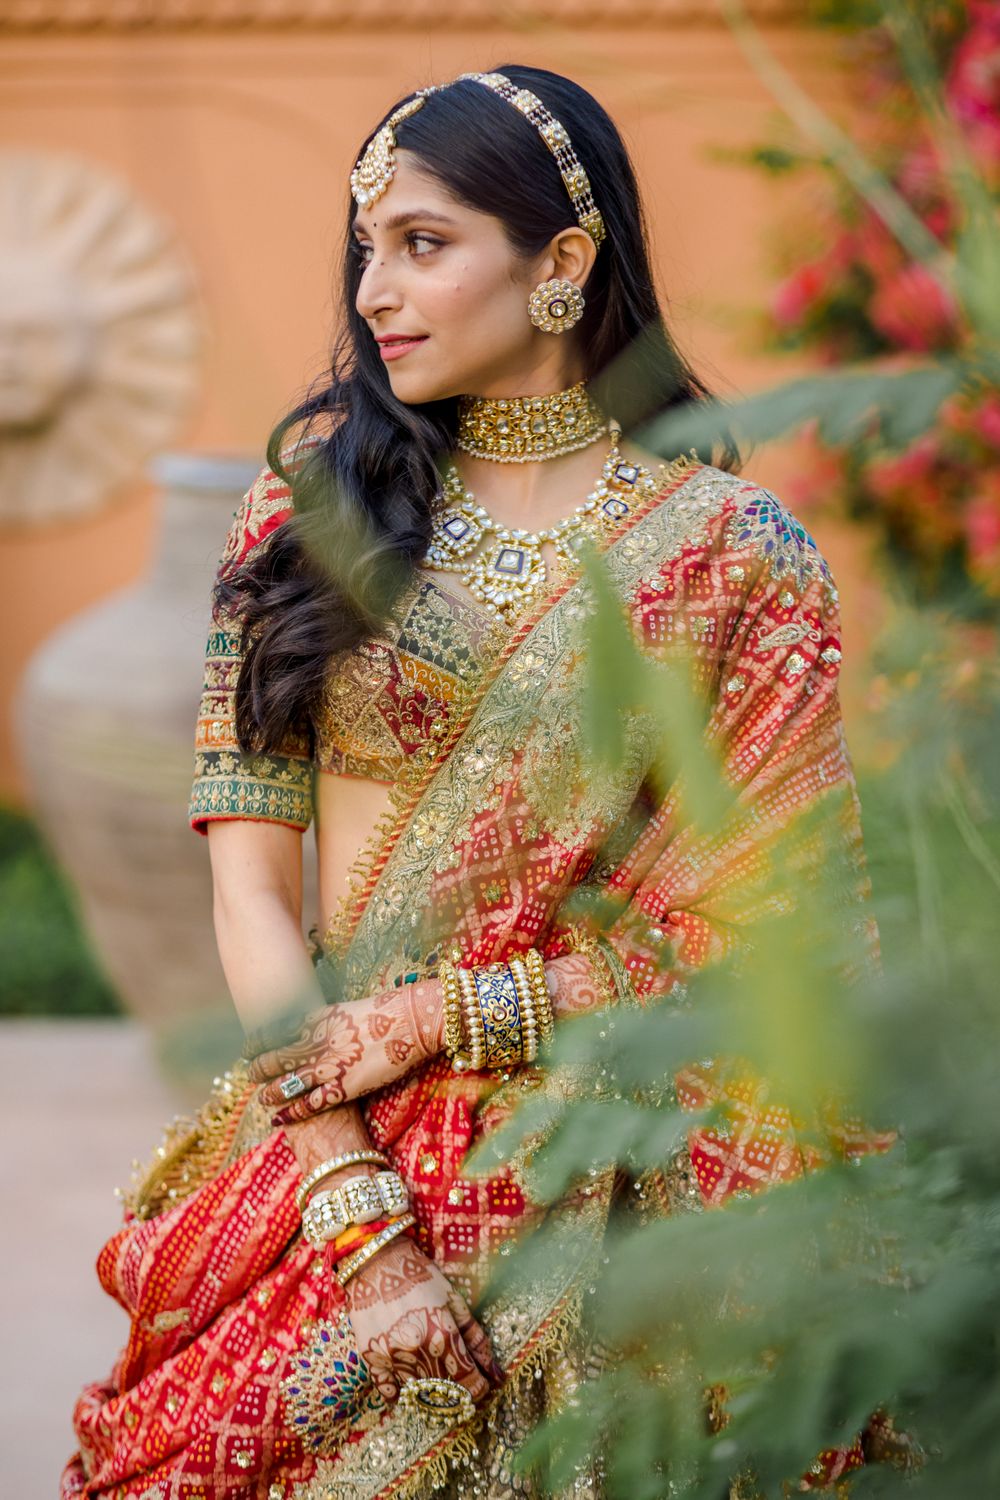 Photo of Bride wearing a multi-coloured lehenga on her wedding day.